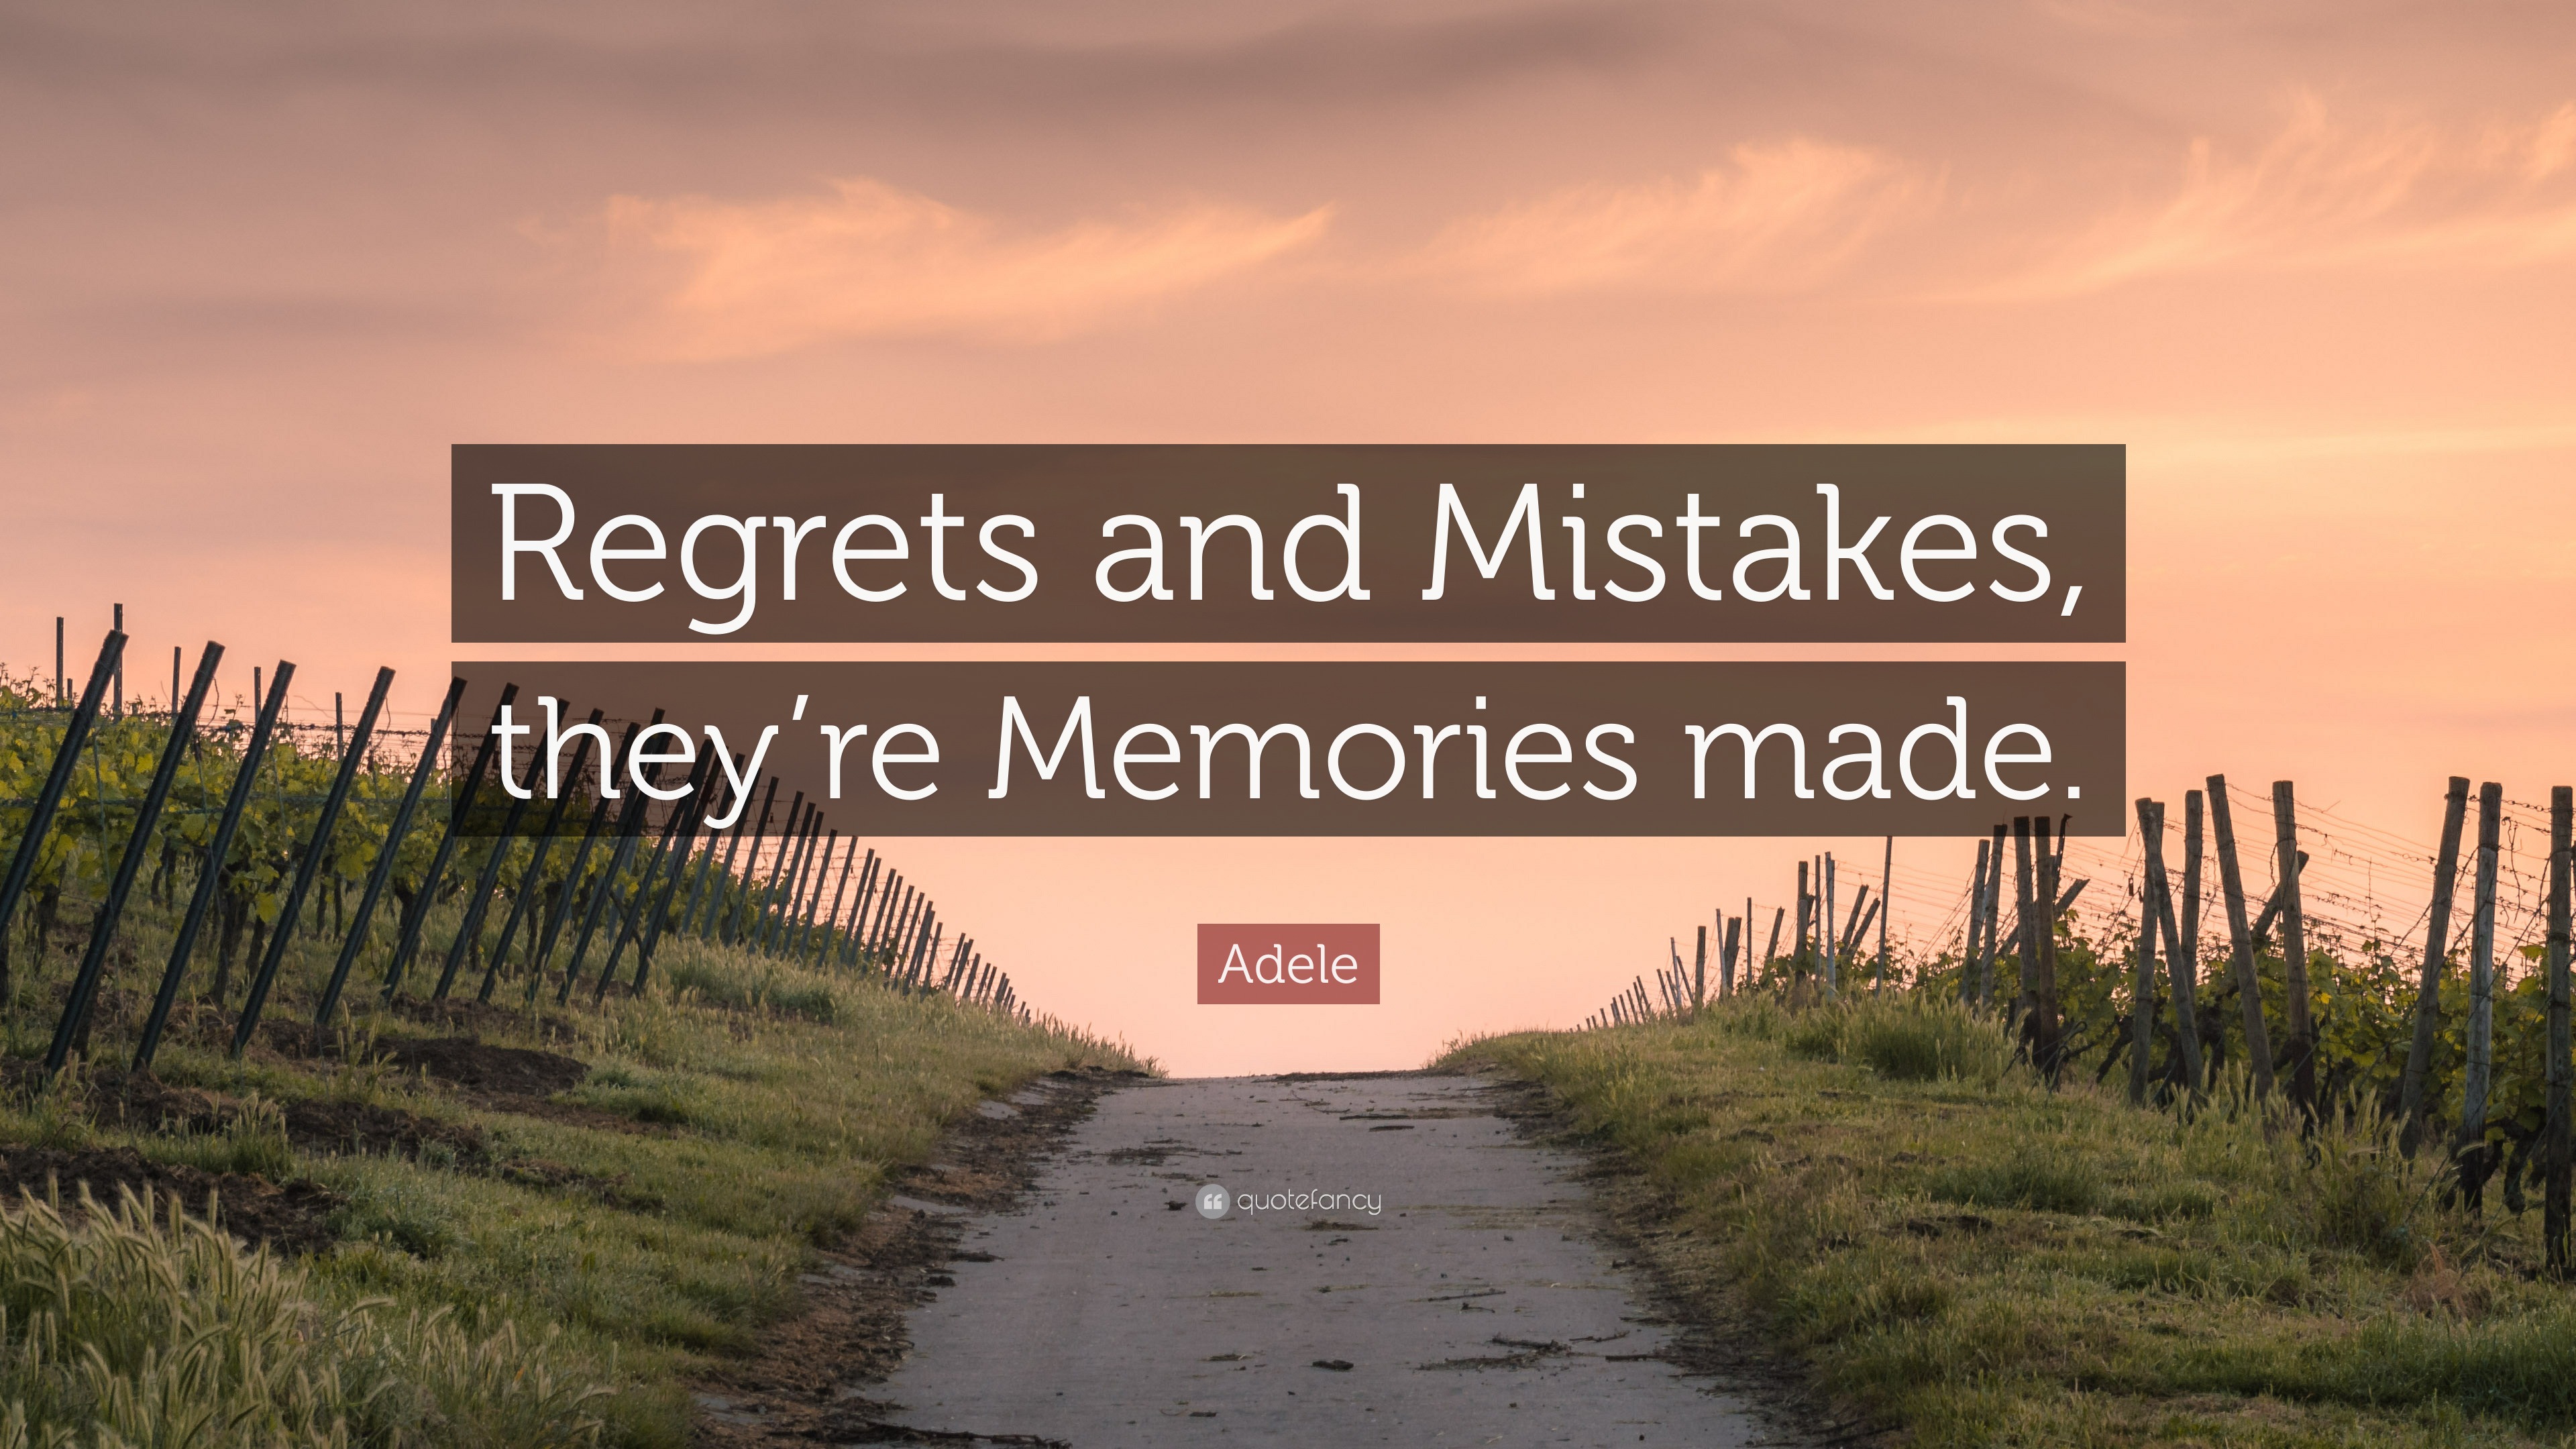 Adele Quote: “Regrets and Mistakes, they’re Memories made.”